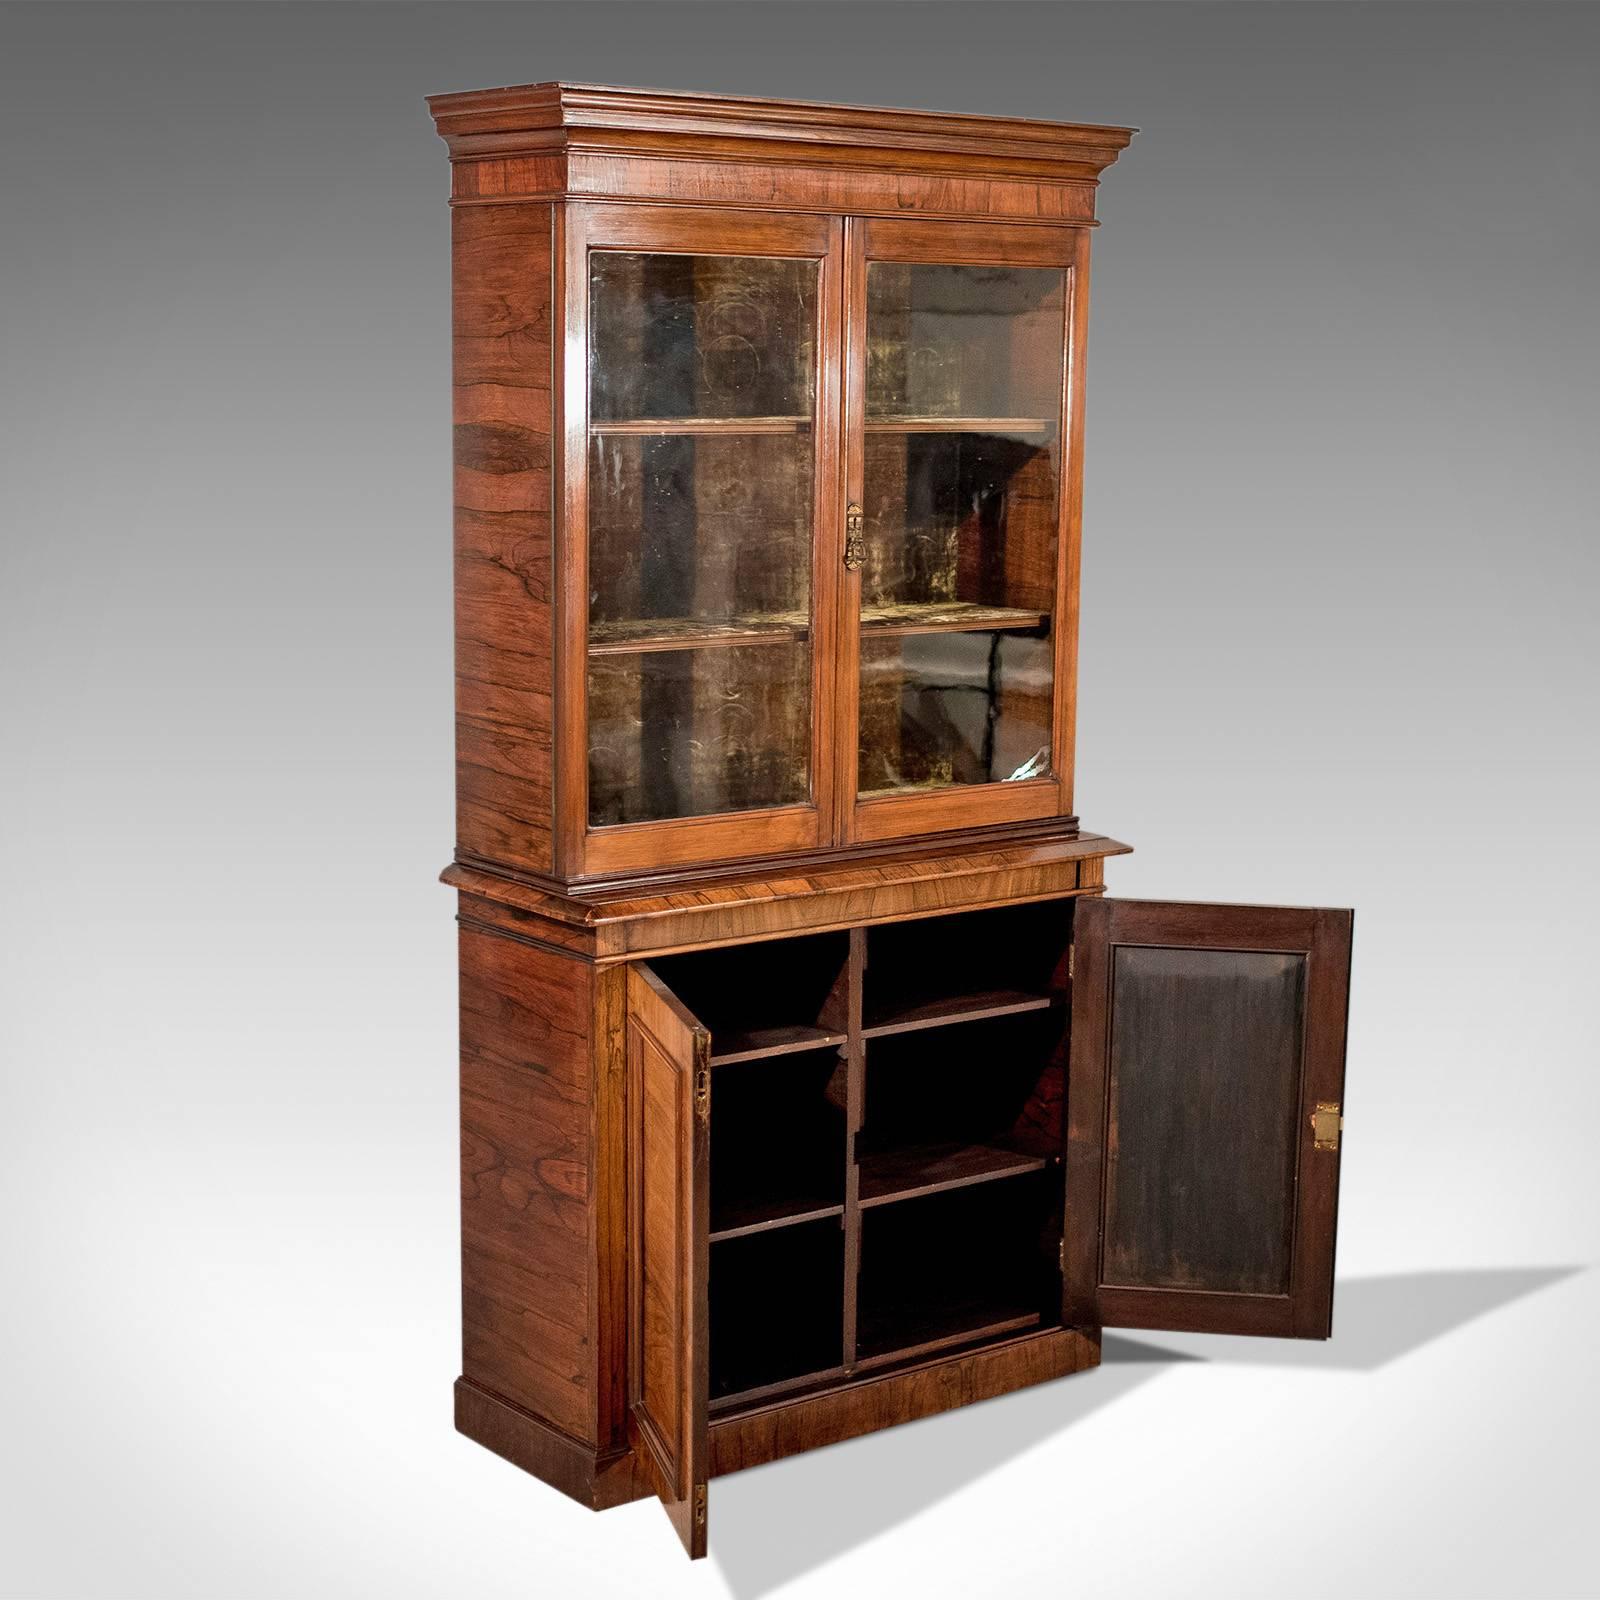 Great Britain (UK) Antique Display Cabinet, Tall, Victorian, Bookcase, Circa 1900